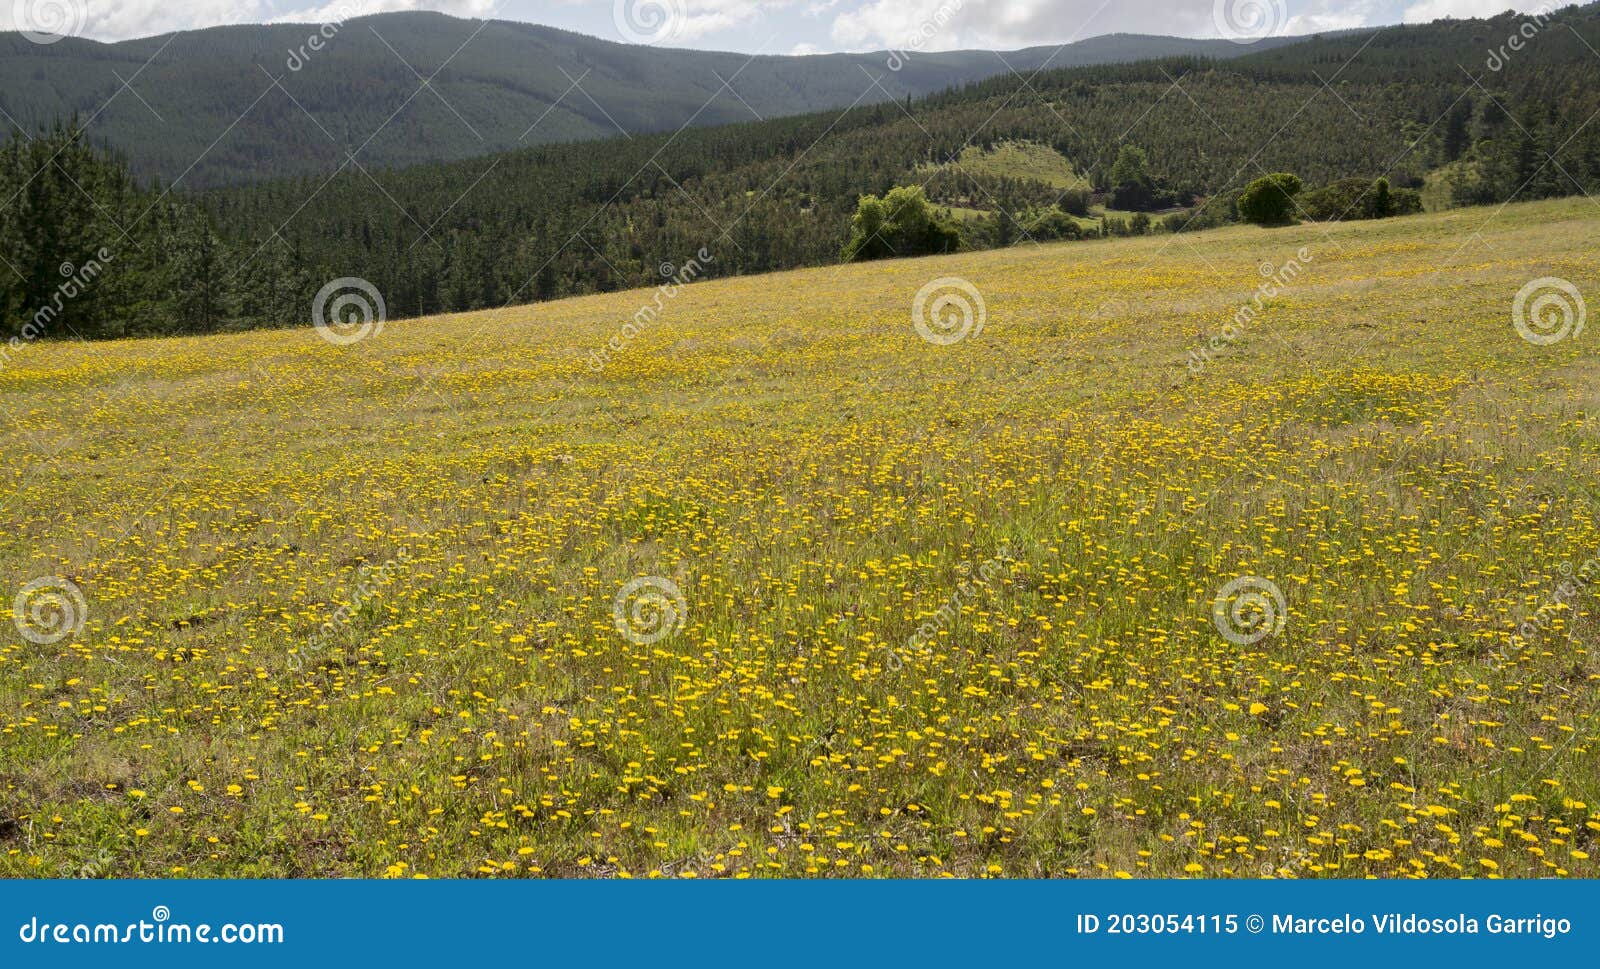 wild flowers in the green natural meadow.